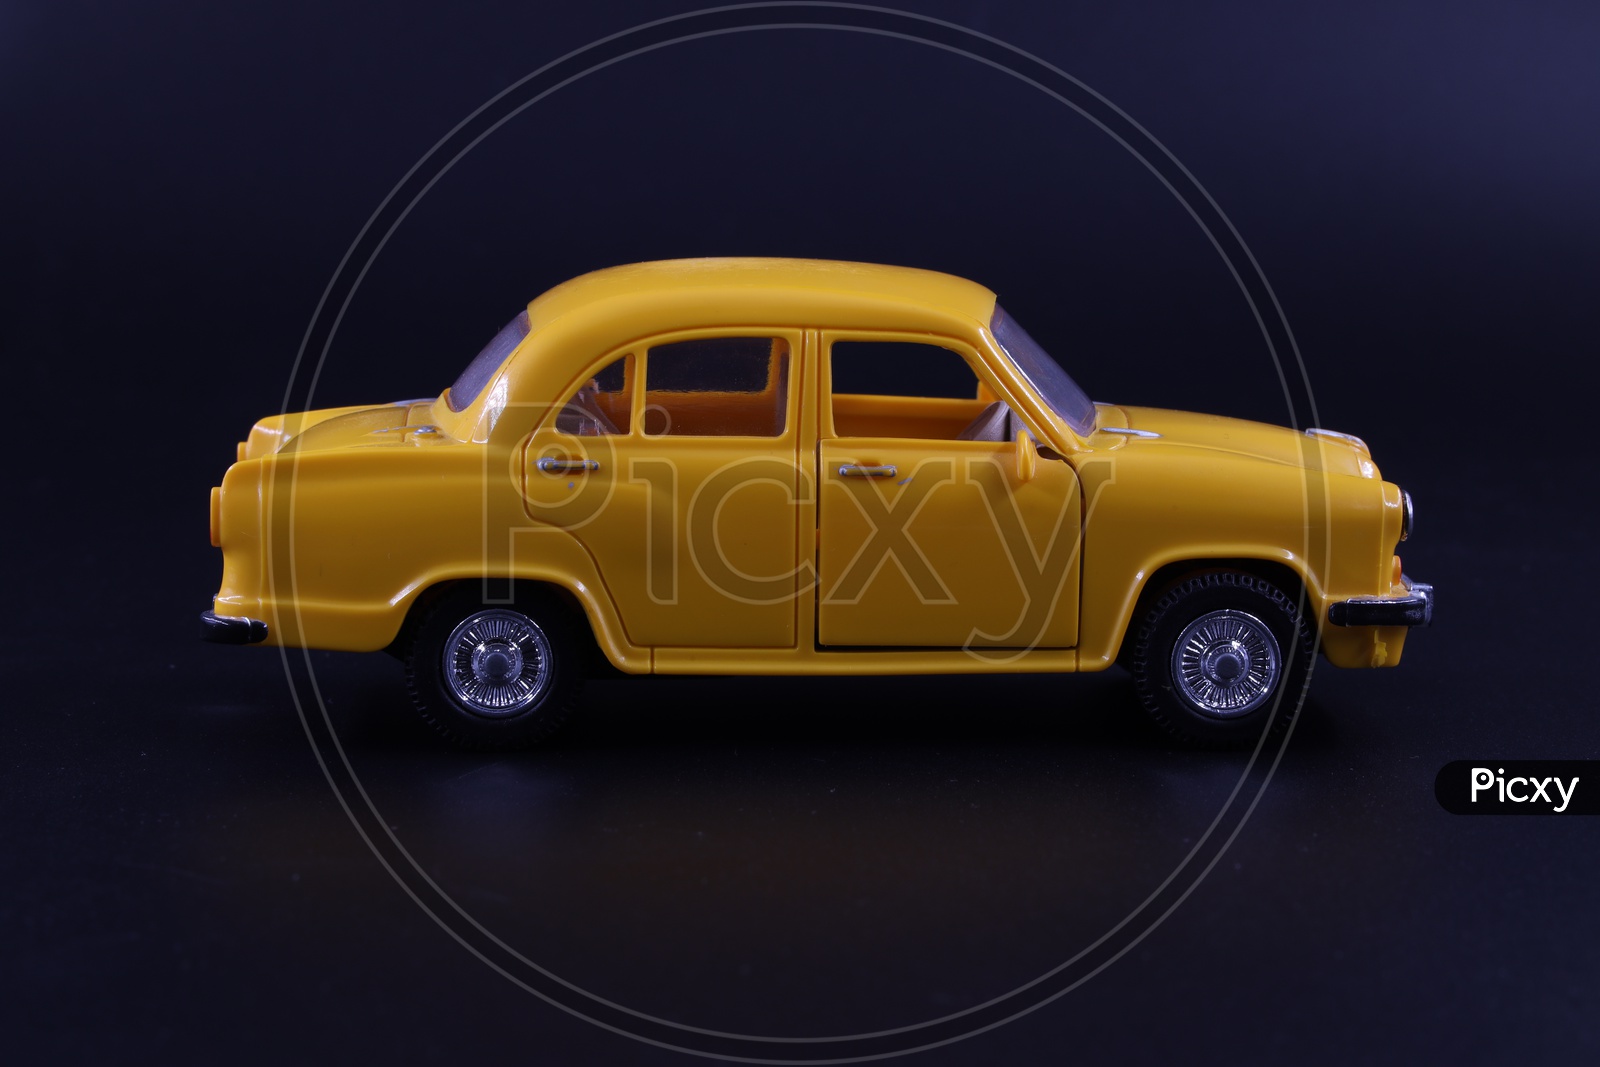 A Yellow Taxi  Or Cab or Car  Toy  Composition Shot On an Isolated Black Background